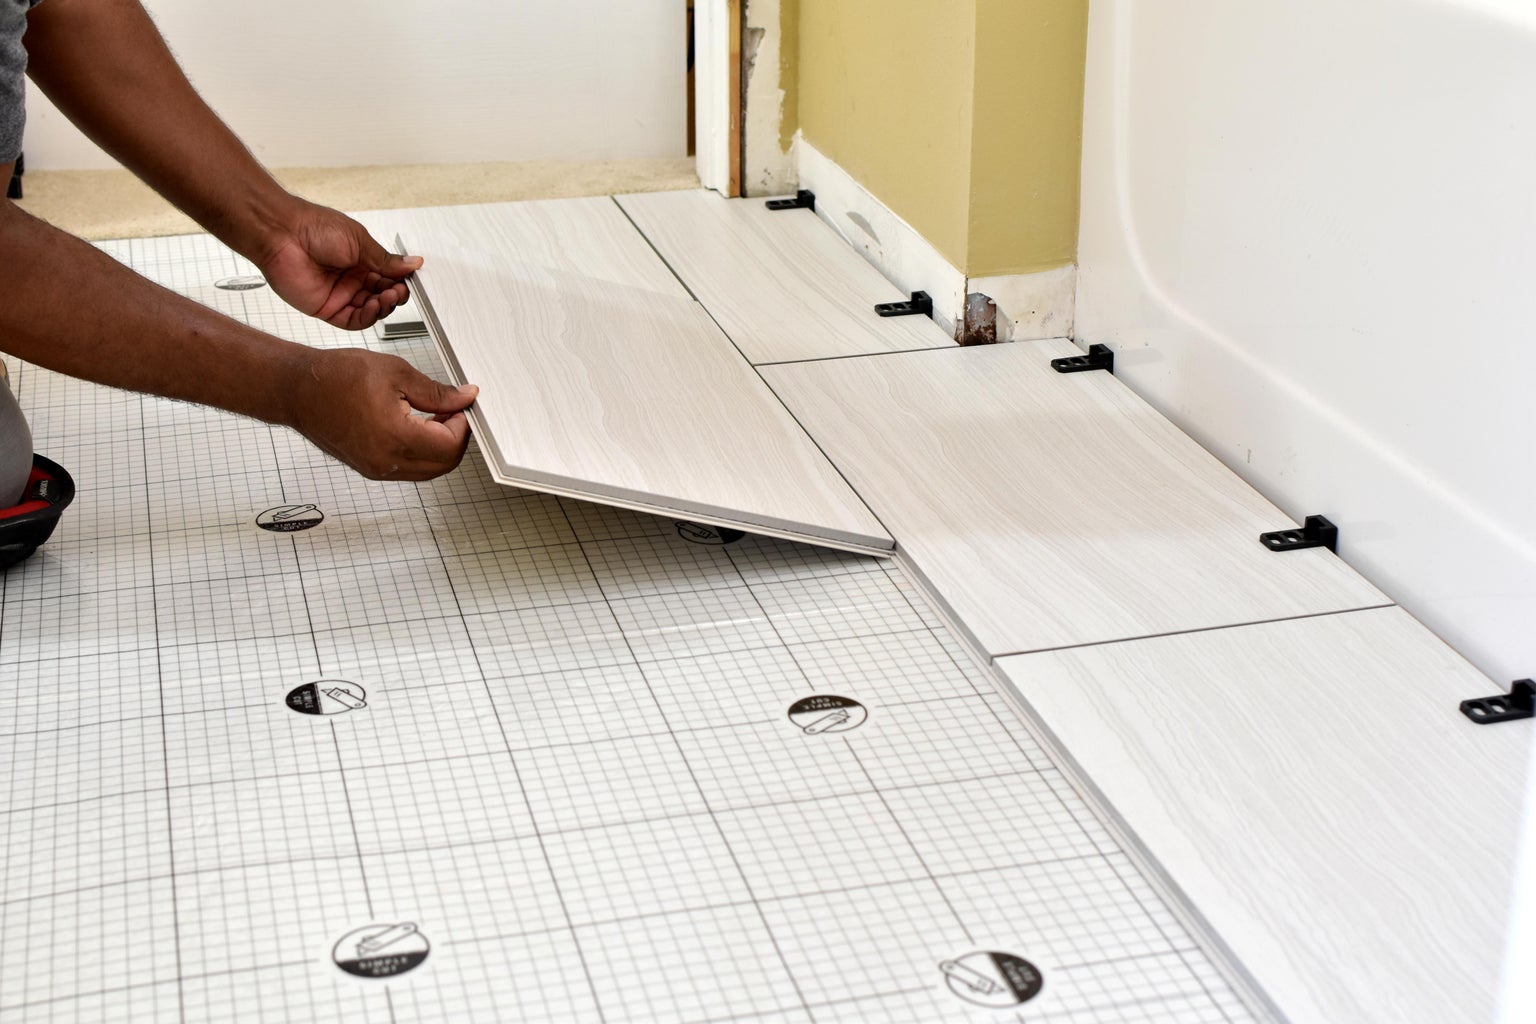 DIY Bathroom Tiles - How to Screw It Up in Spectacular Fashion